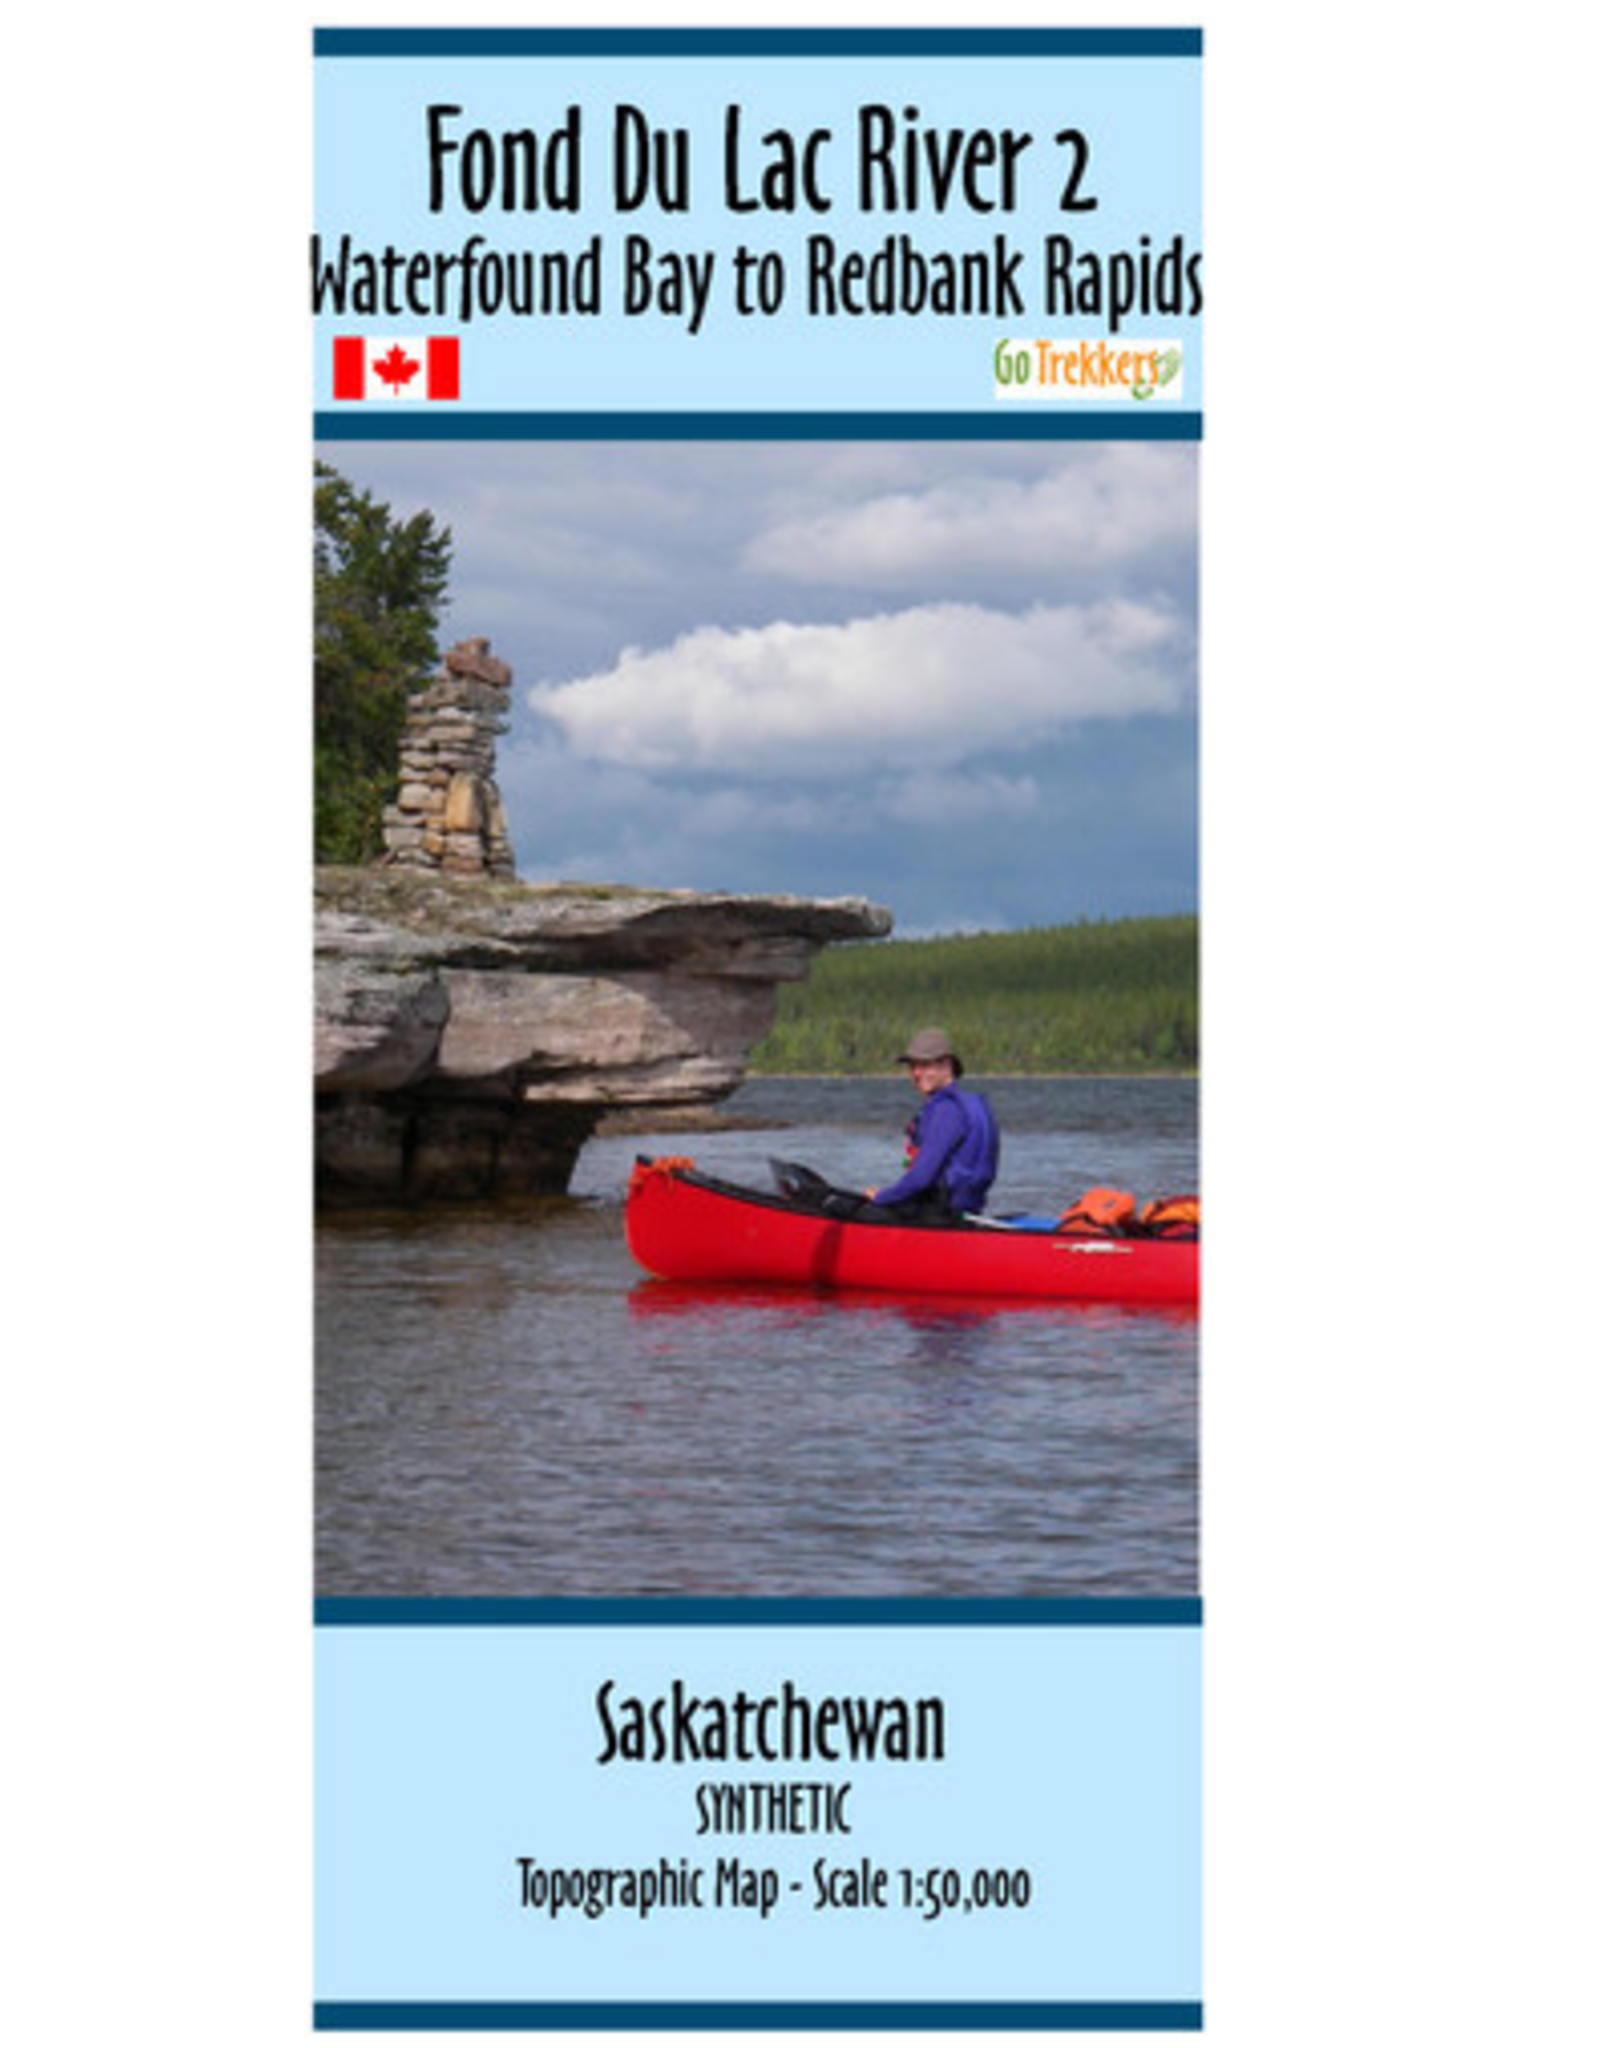 GoTrekkers Fond Du Lac River 2 - Waterfound Bay to Redbank Rapids - SYNTHETIC